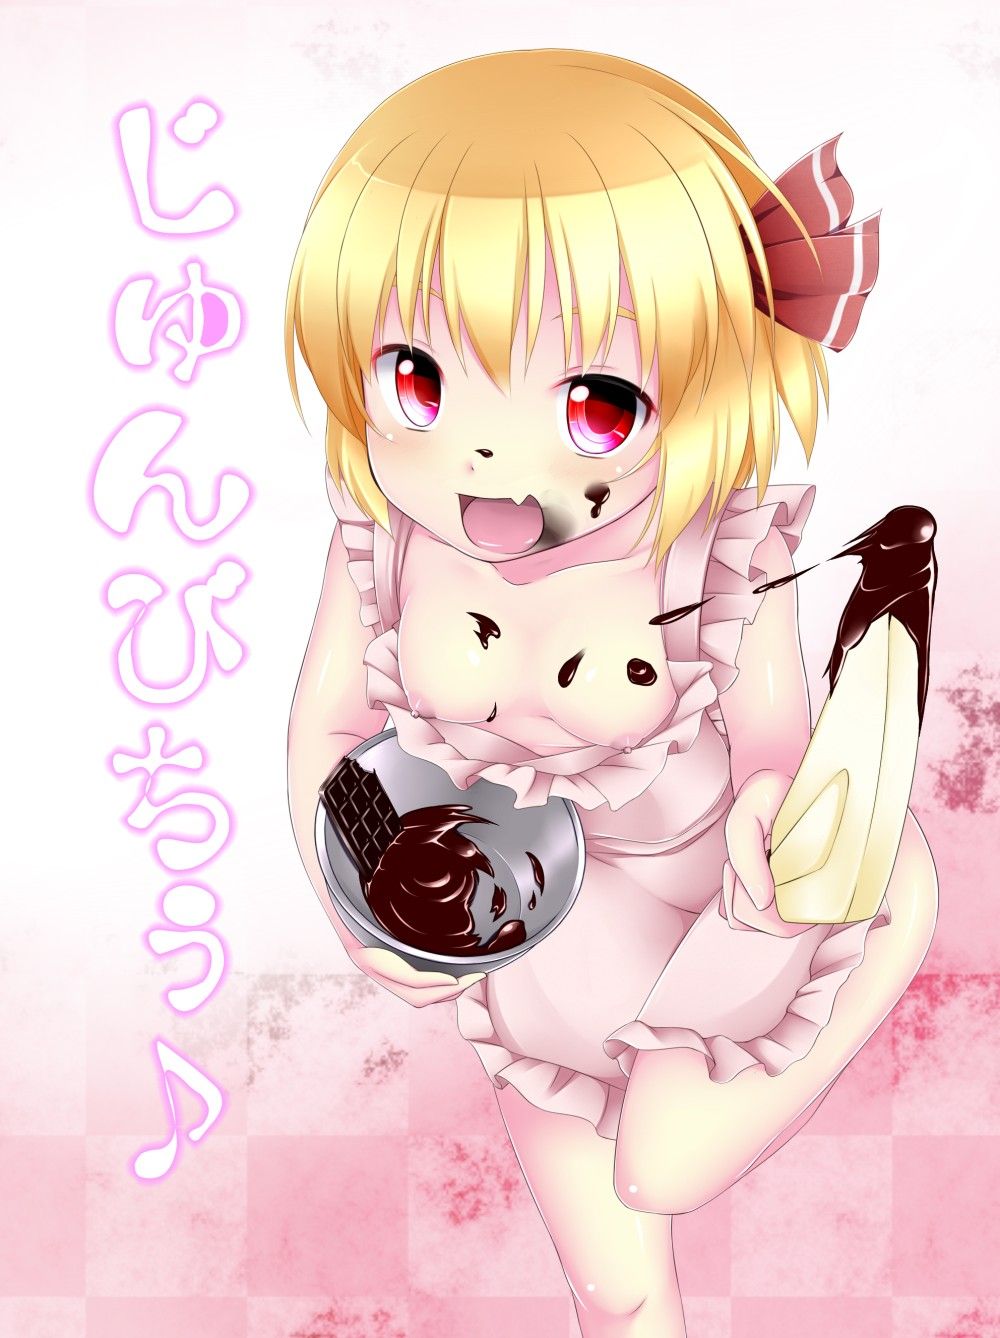 [Touhou Project] Rumia photo Gallery Part2 22